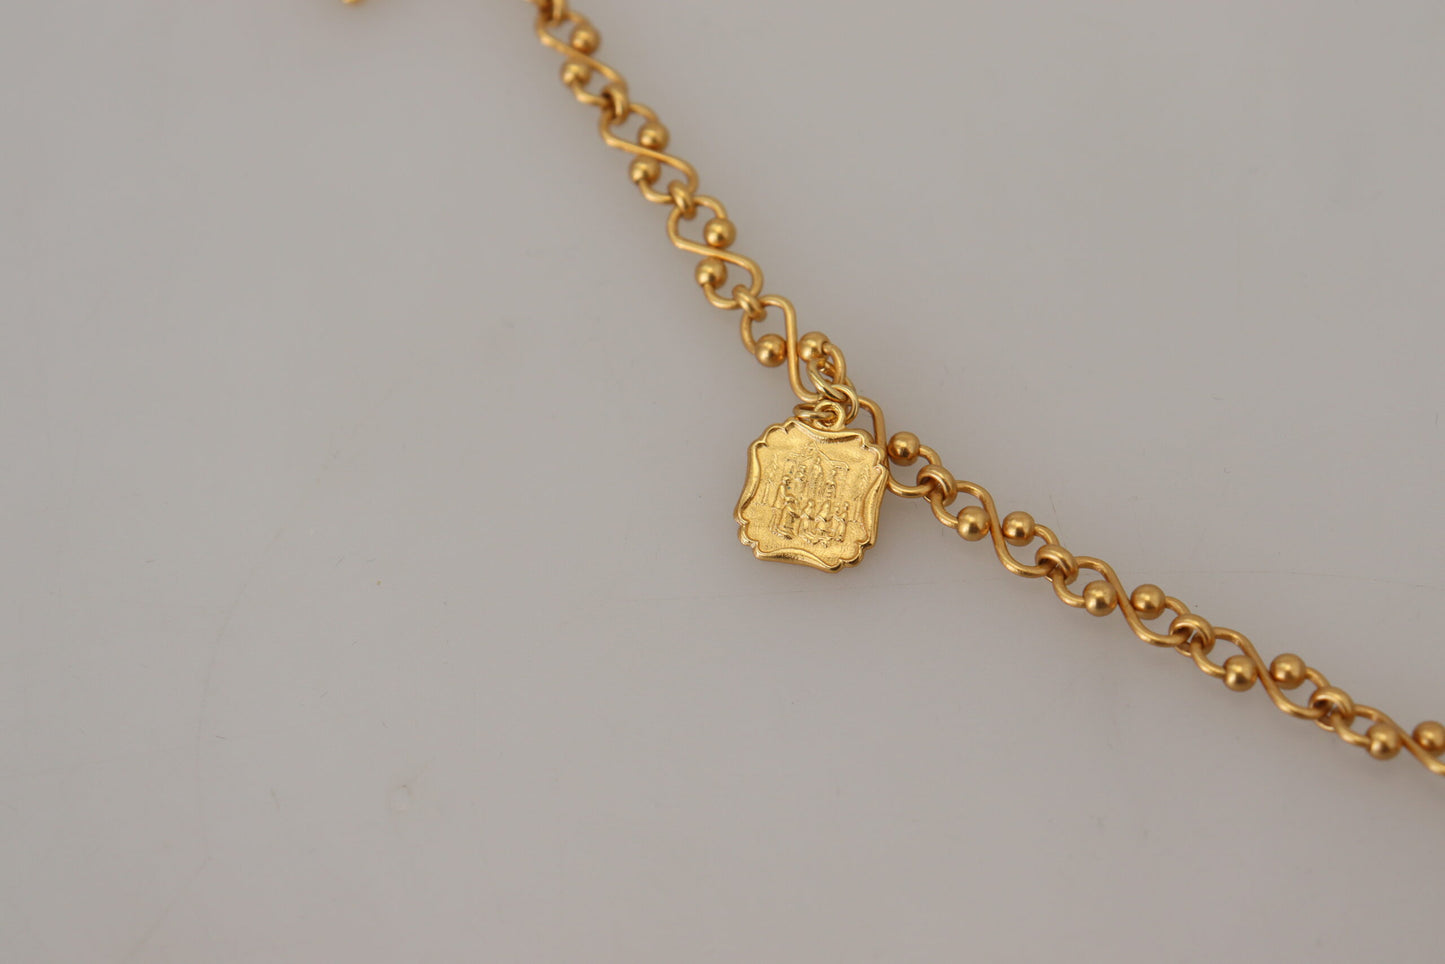 Gold Tone Cross Charm Necklace